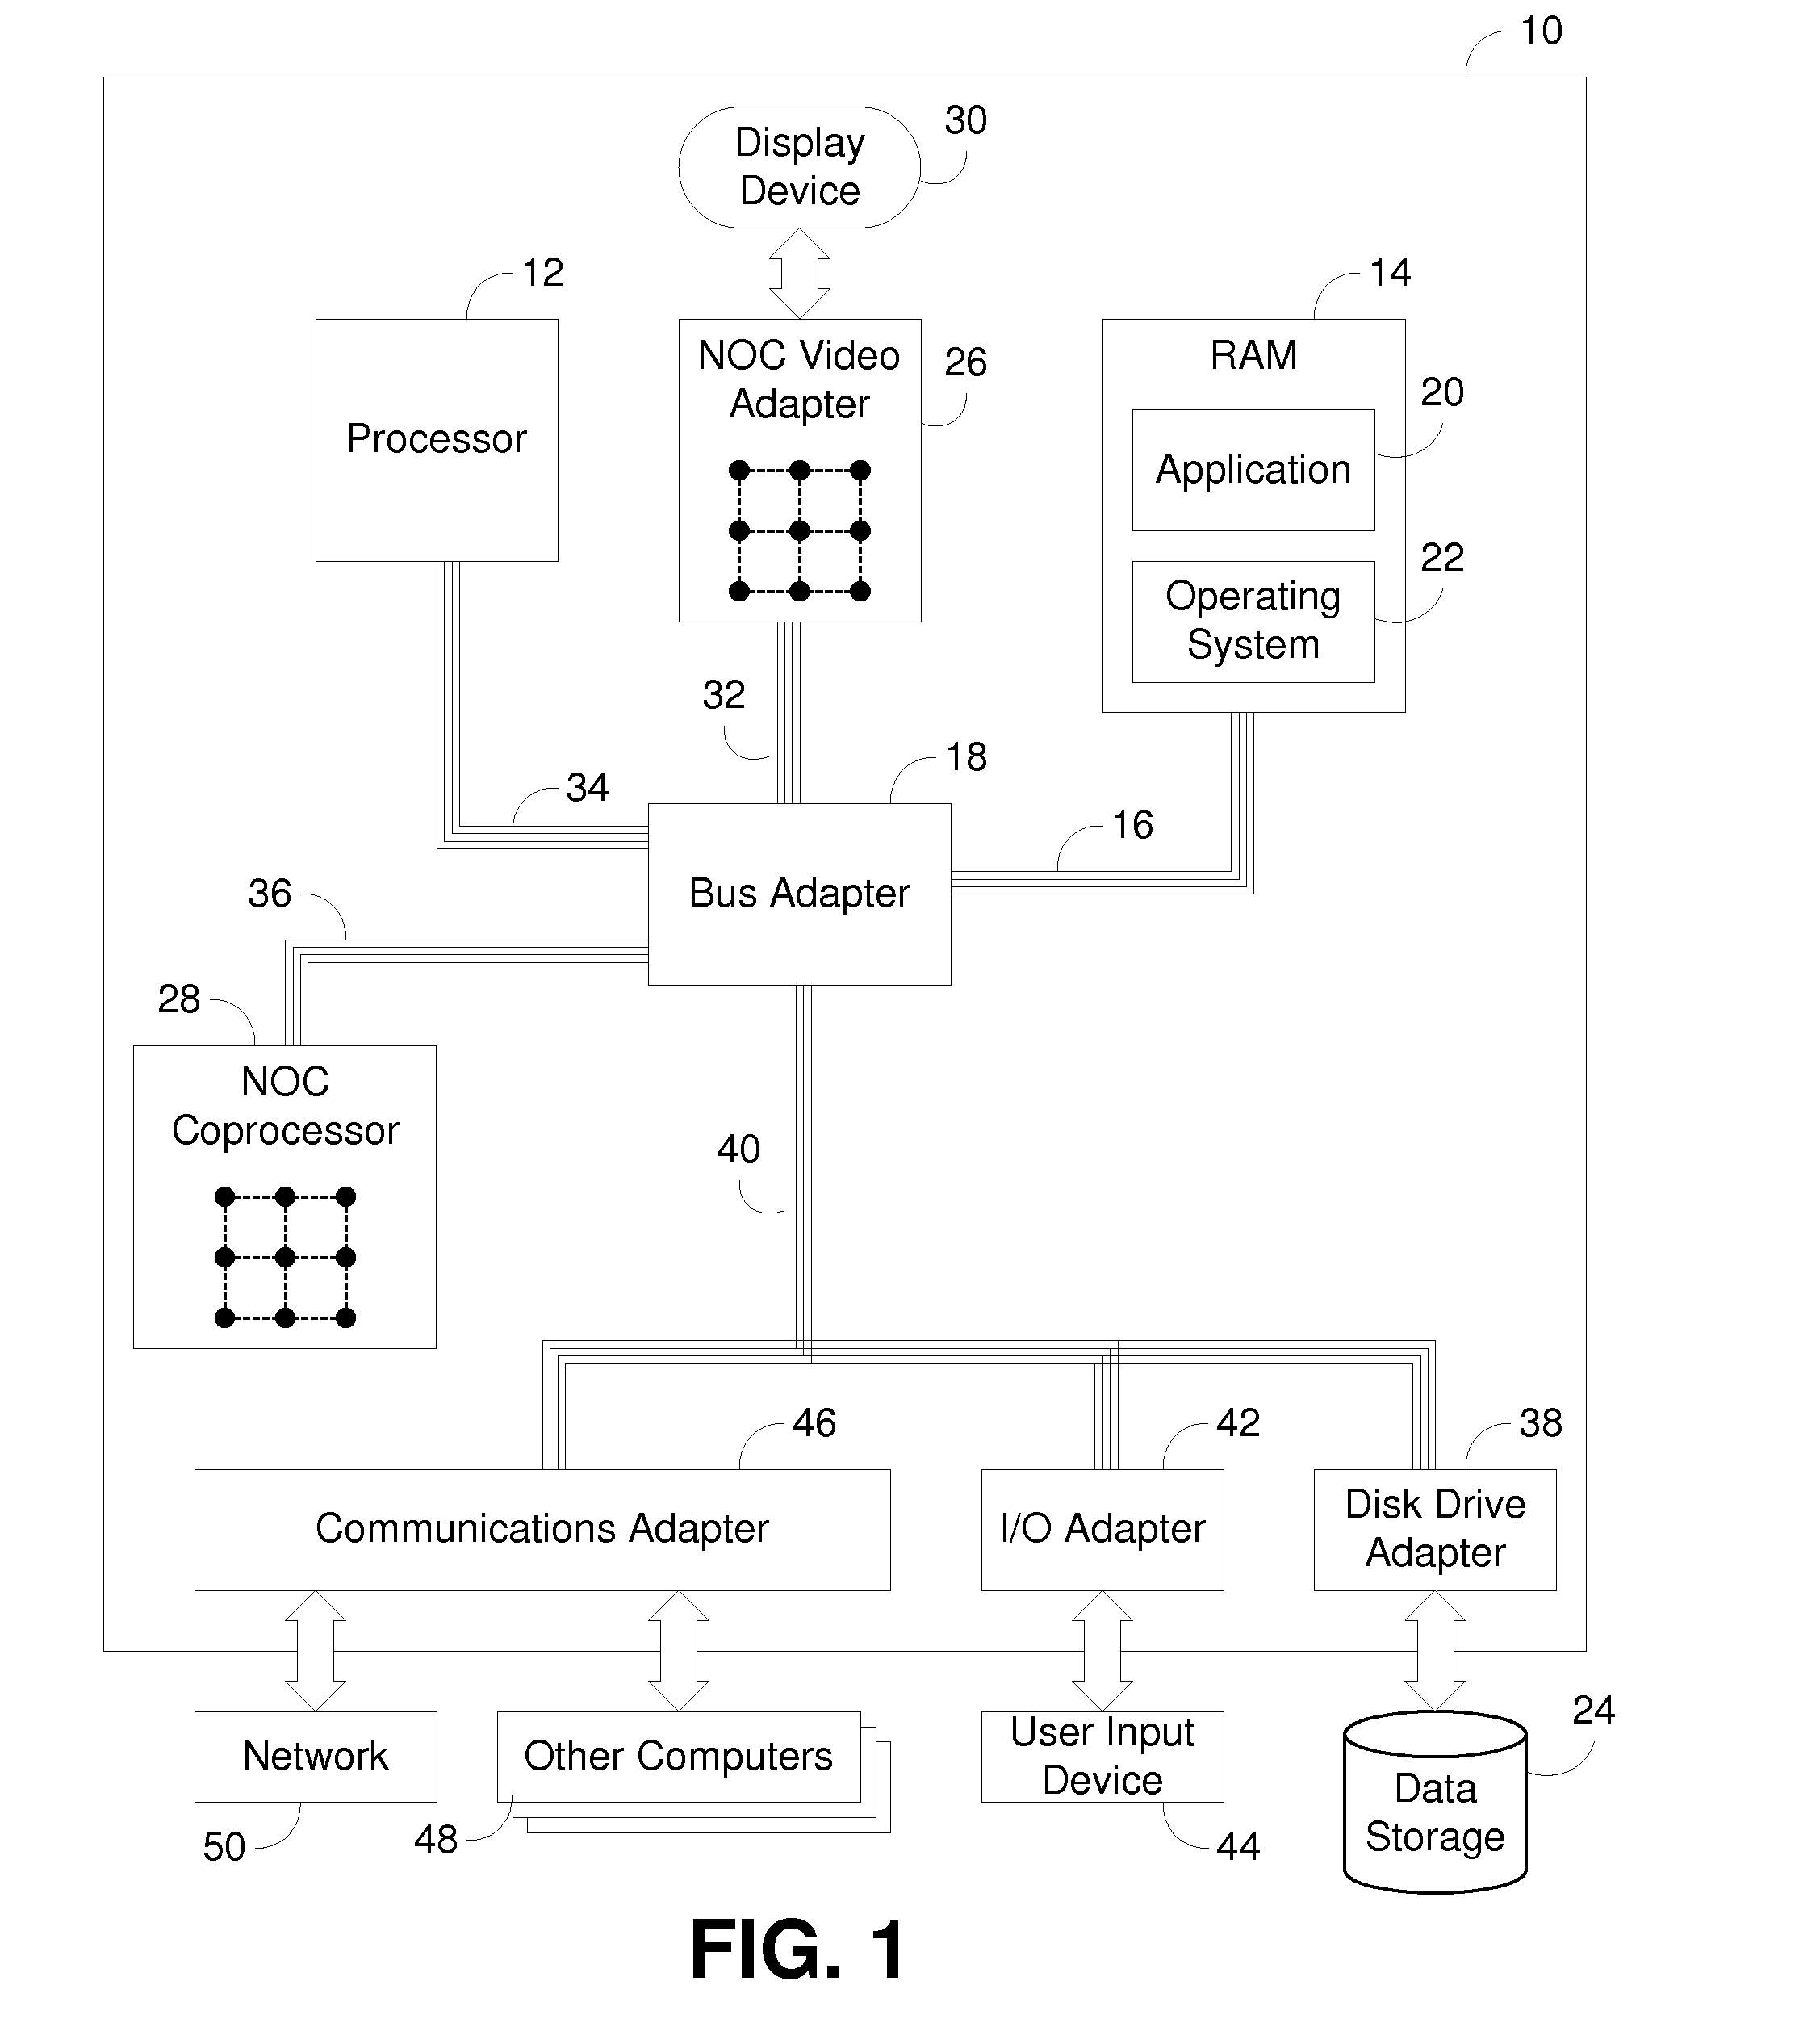 Processing Unit Incorporating Special Purpose Register for Use with Instruction-Based Persistent Vector Multiplexer Control